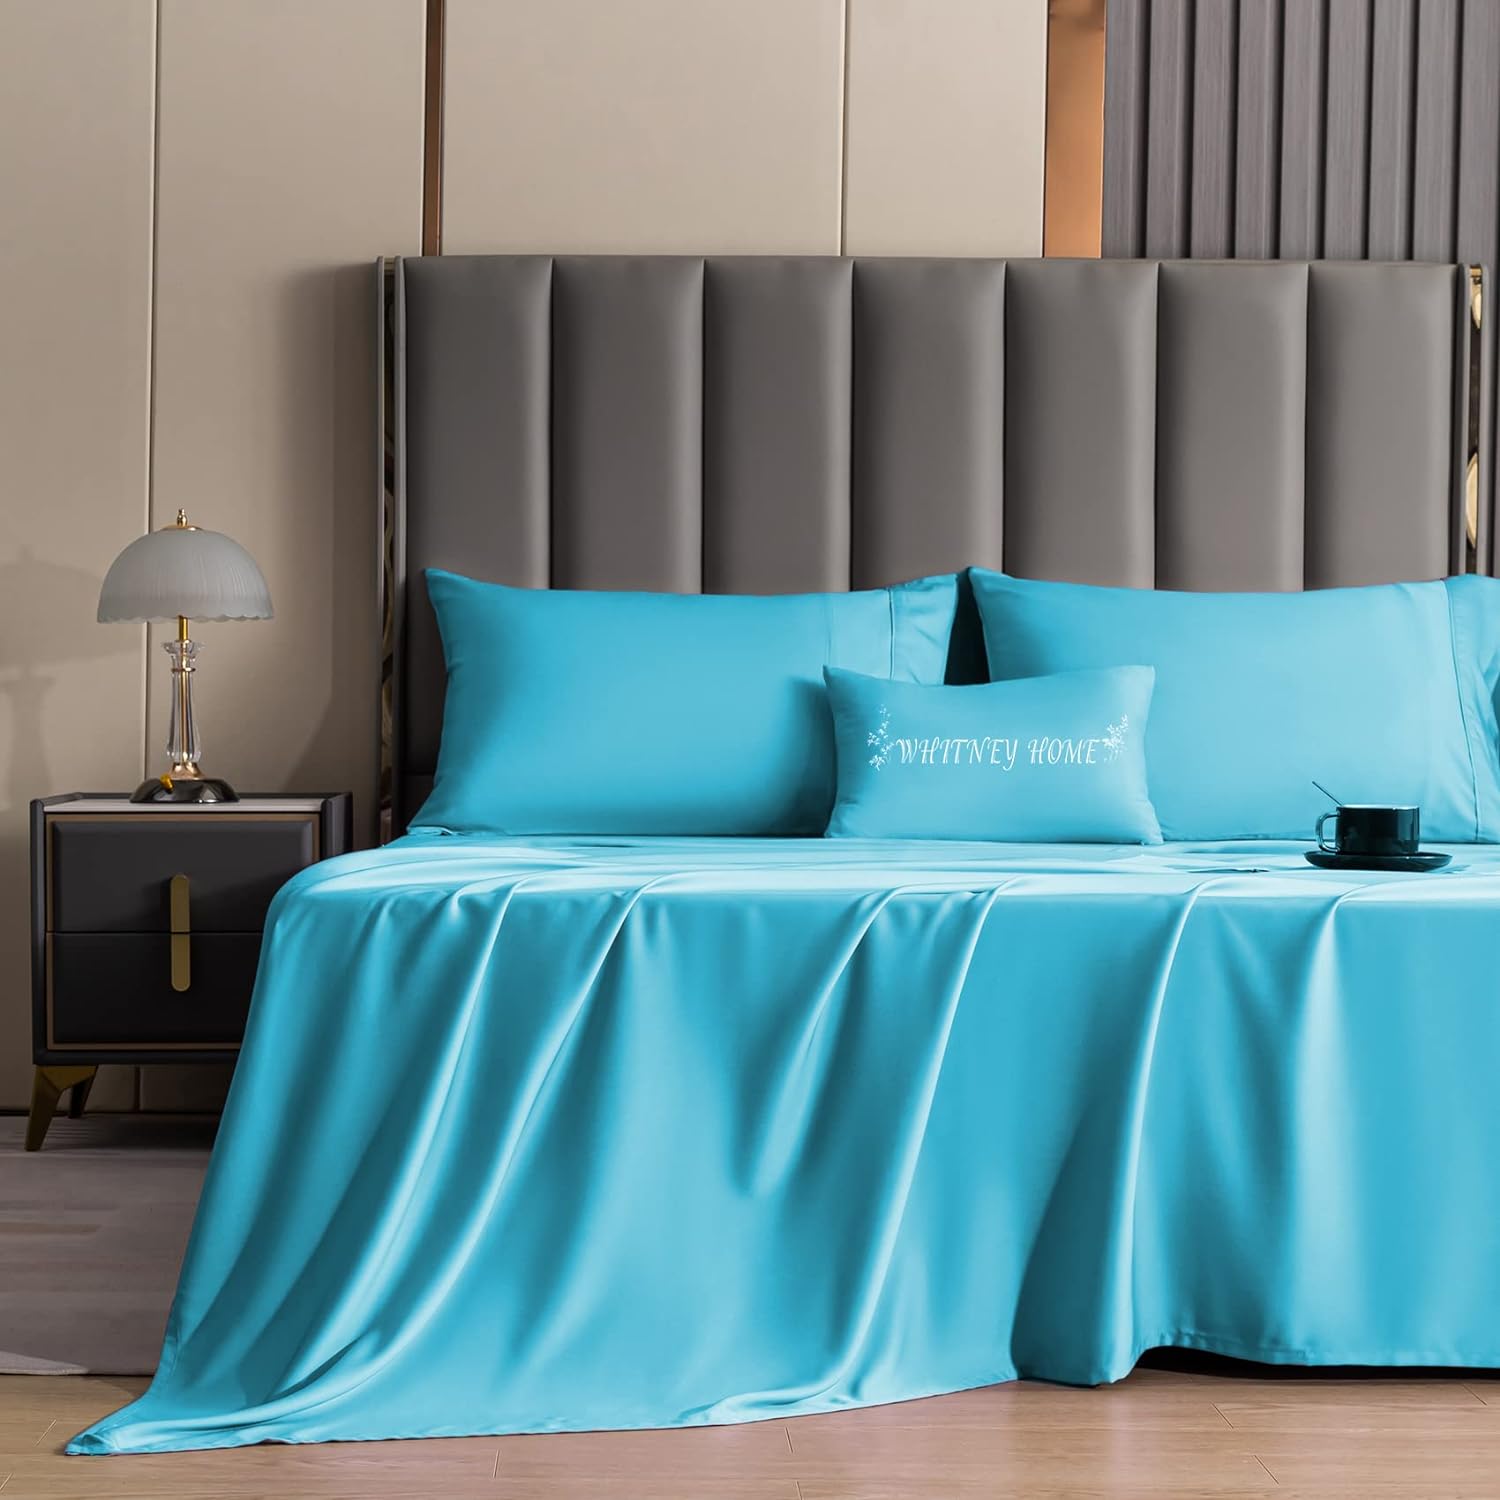 Queen Size Sheet Set Aqua Blue 4 Piece Bamboo Sheets Soft Breathable Fitted Sheet 16 Extra Deep Pocket Pure Luxury Hotel Collection Cooling Bamboo Bed Sheets Wrinkle Free Durable 90 x 102 Sheets